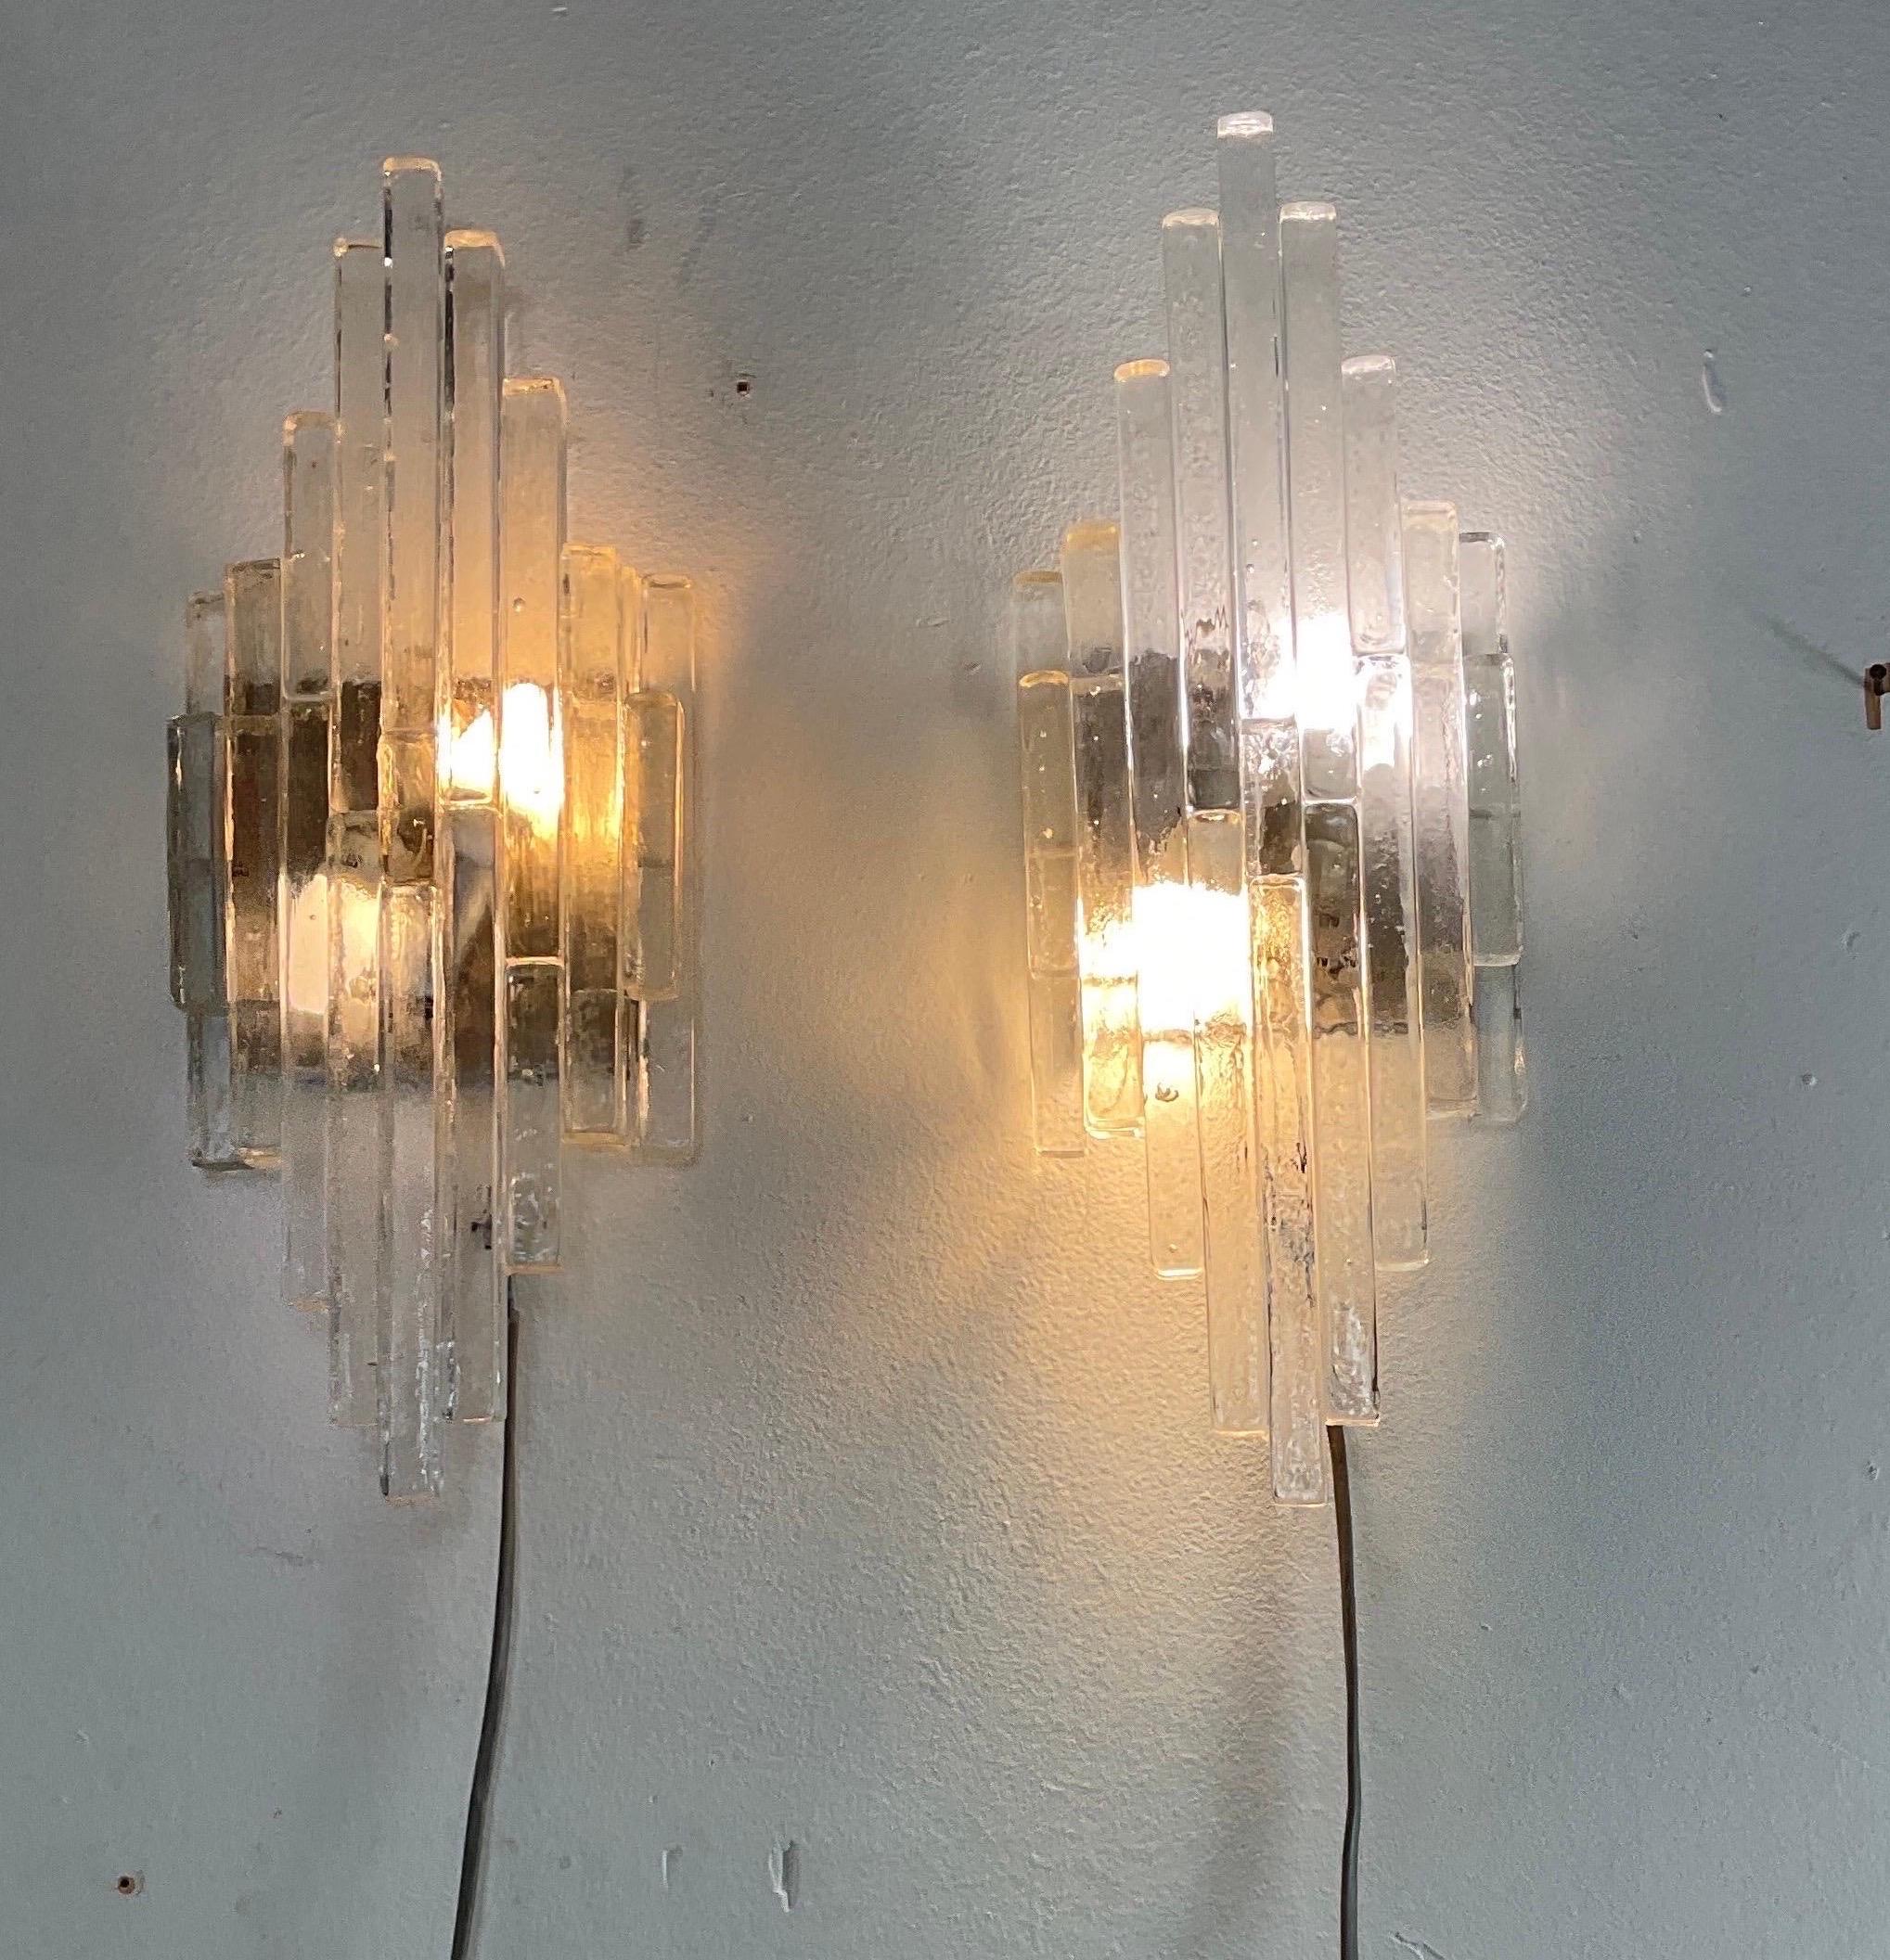 Late 20th Century 'Linea' series wall lamps, Poliarte Production, Verona, '70s.